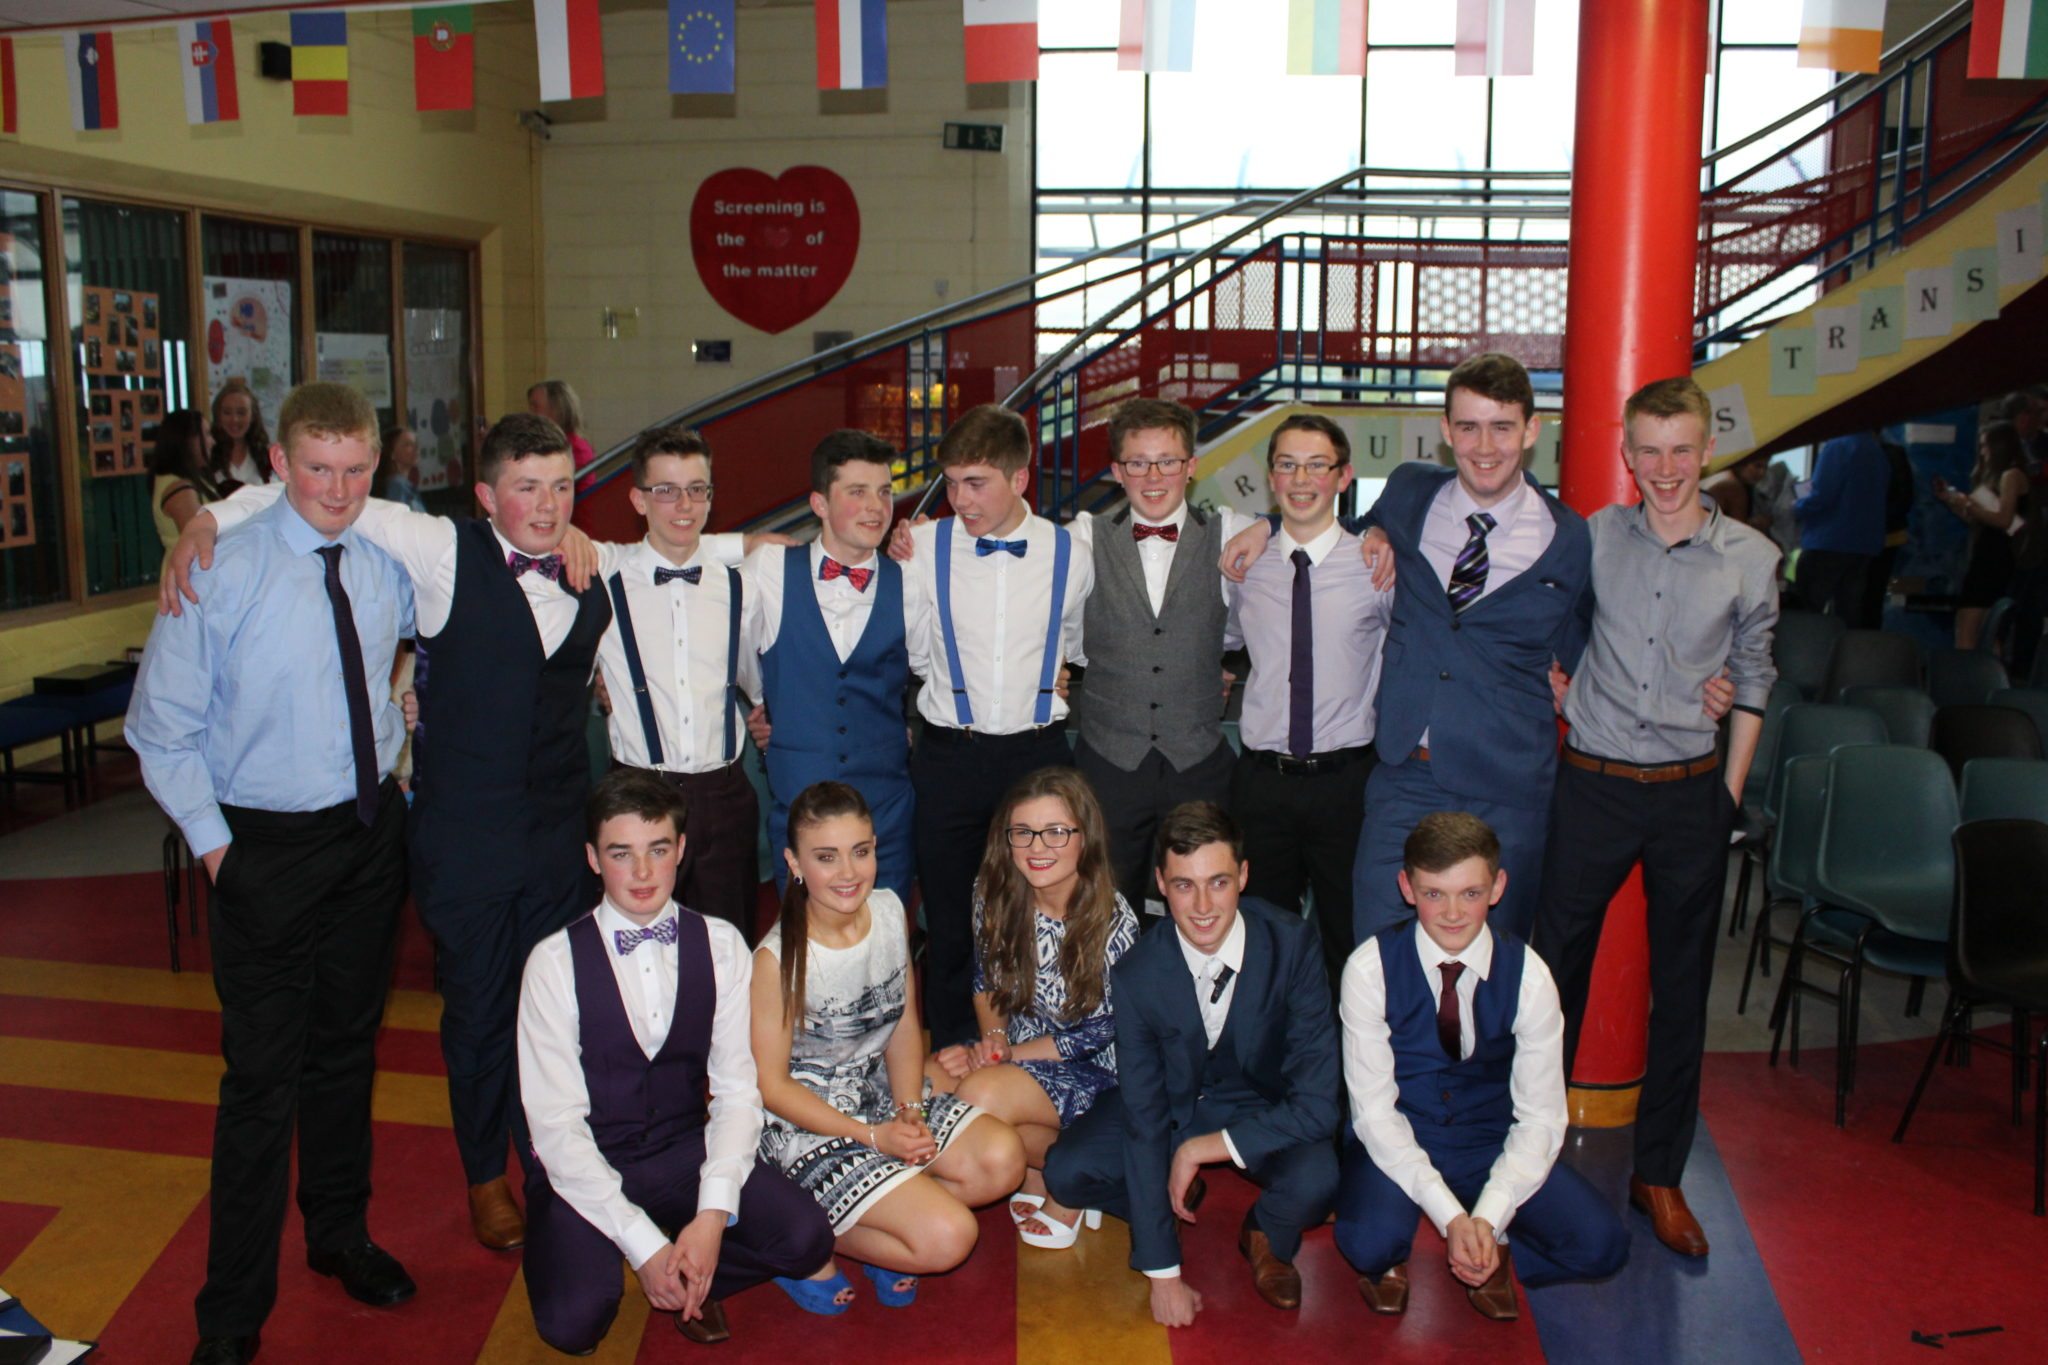 Desmond College TY Graduation 2015: Some of the TY Students at their Graduation